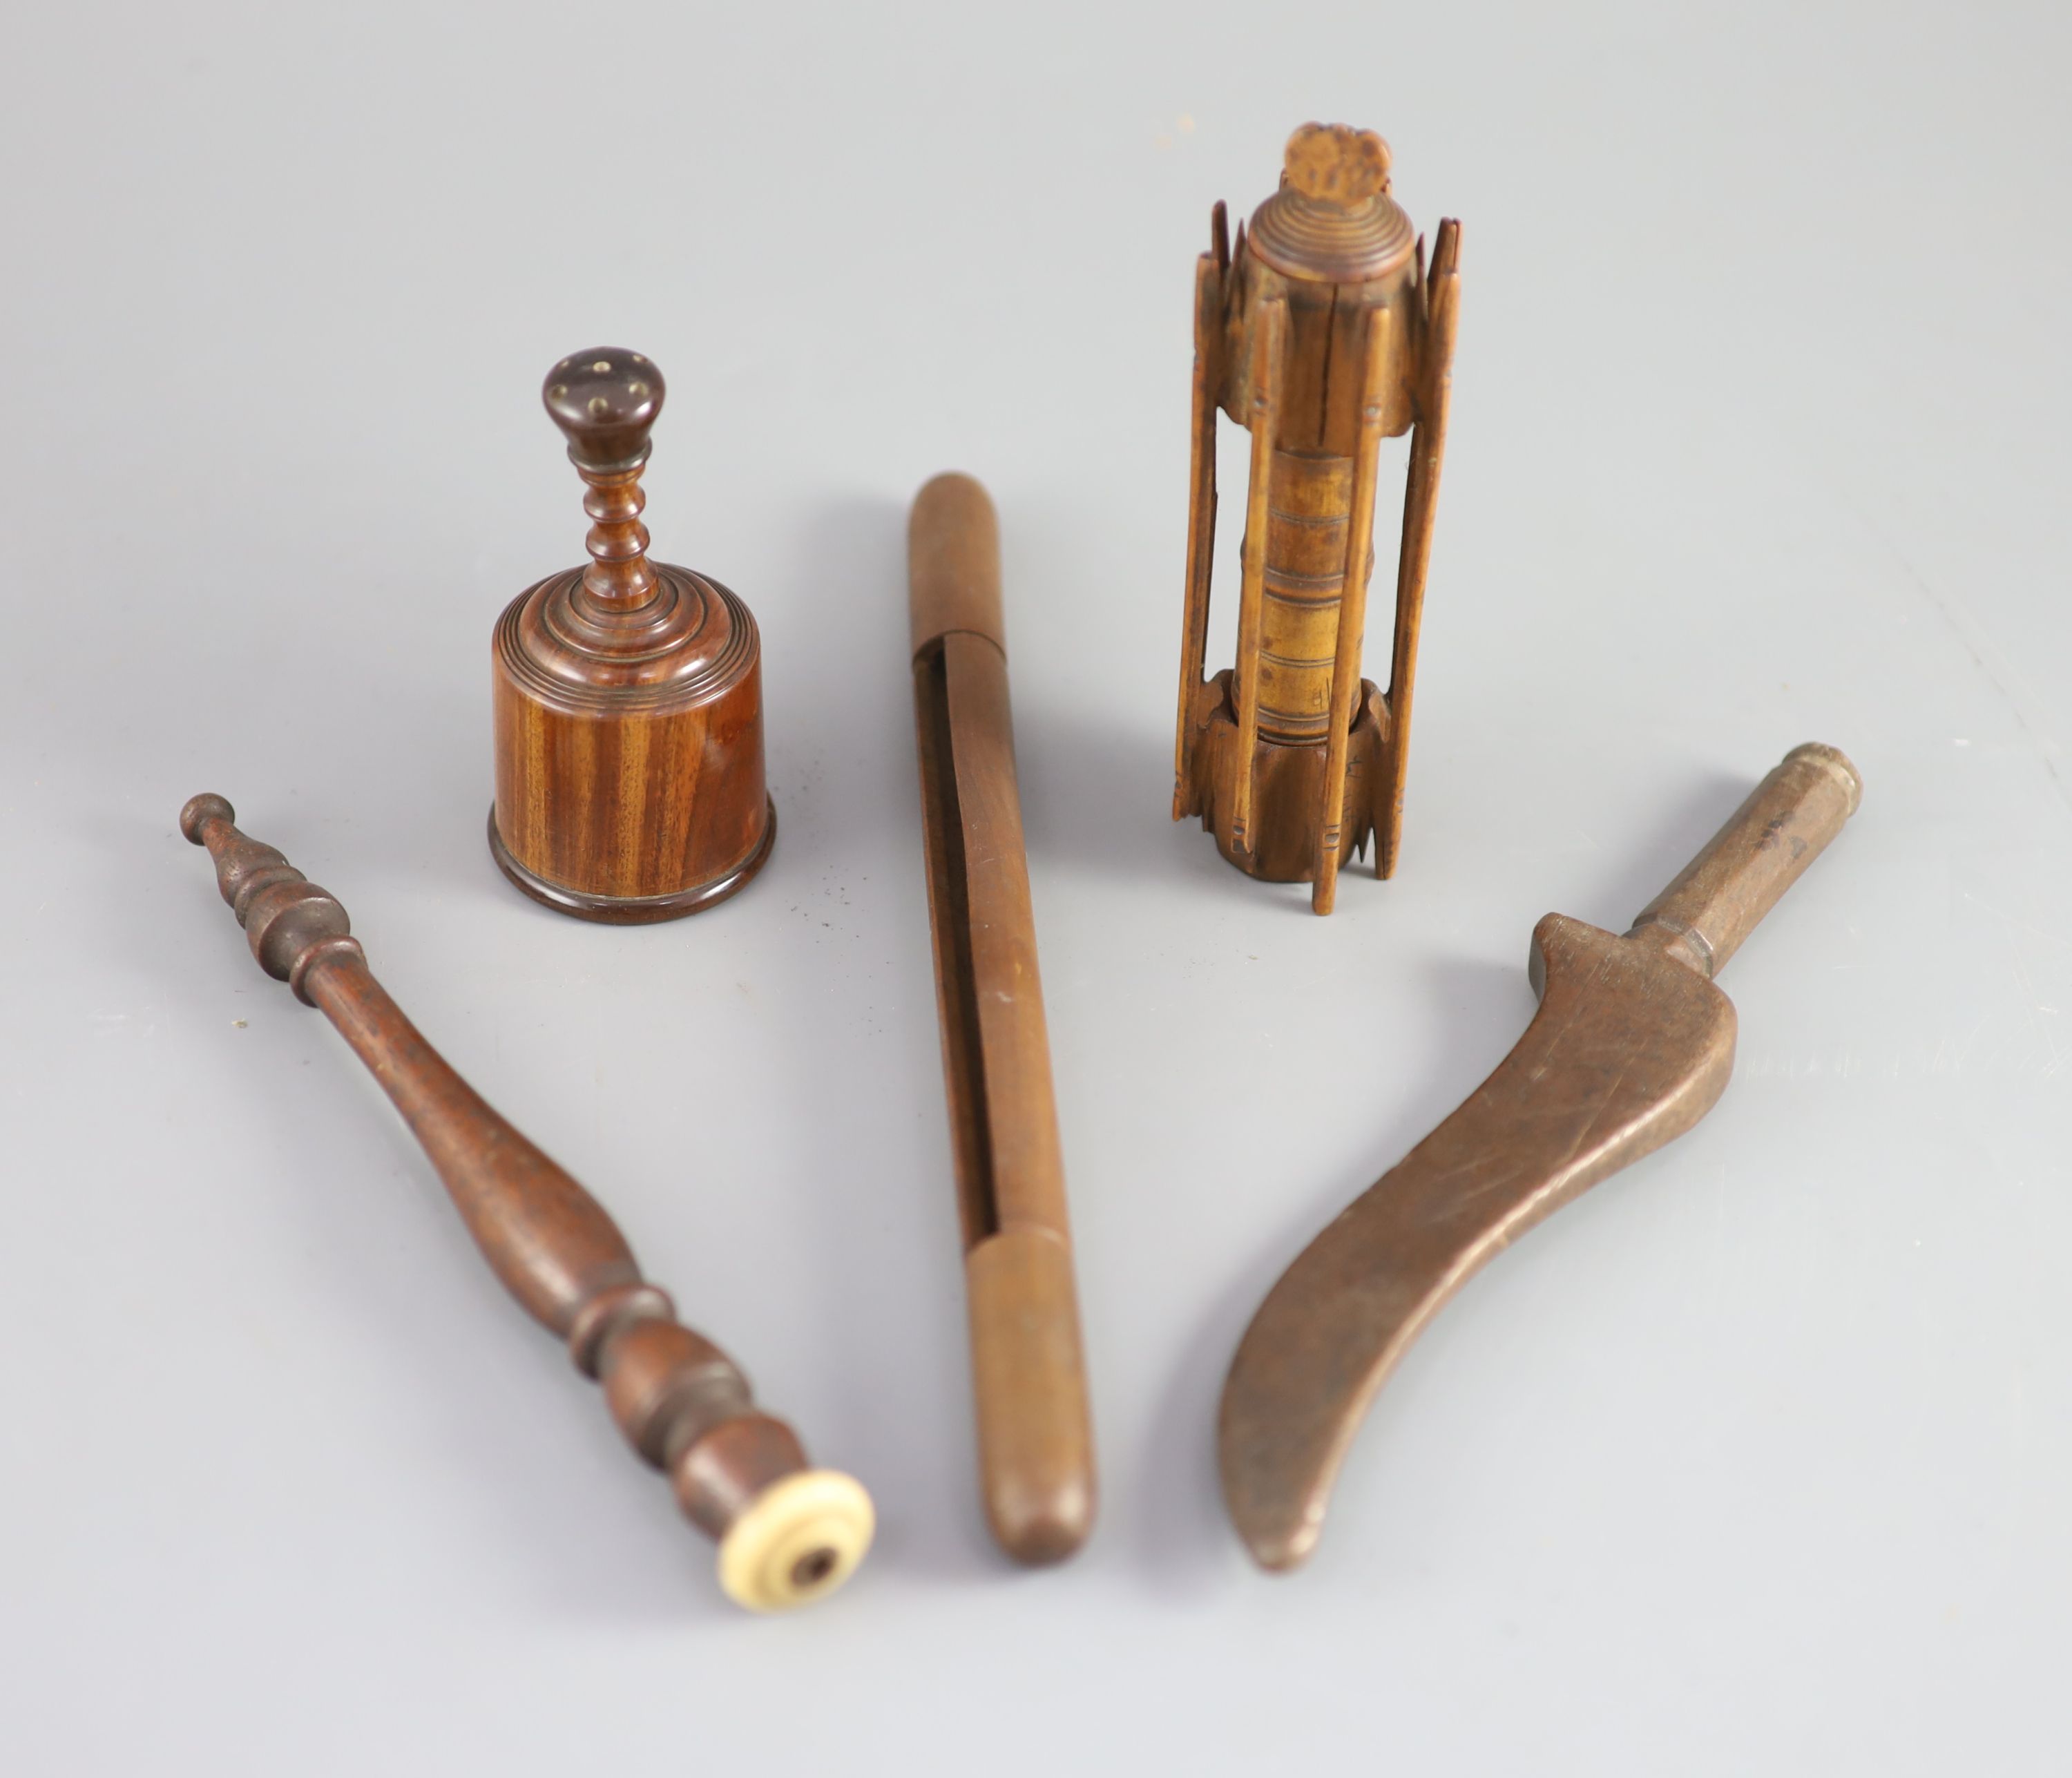 A late 18th century treen spool holder and silk winder